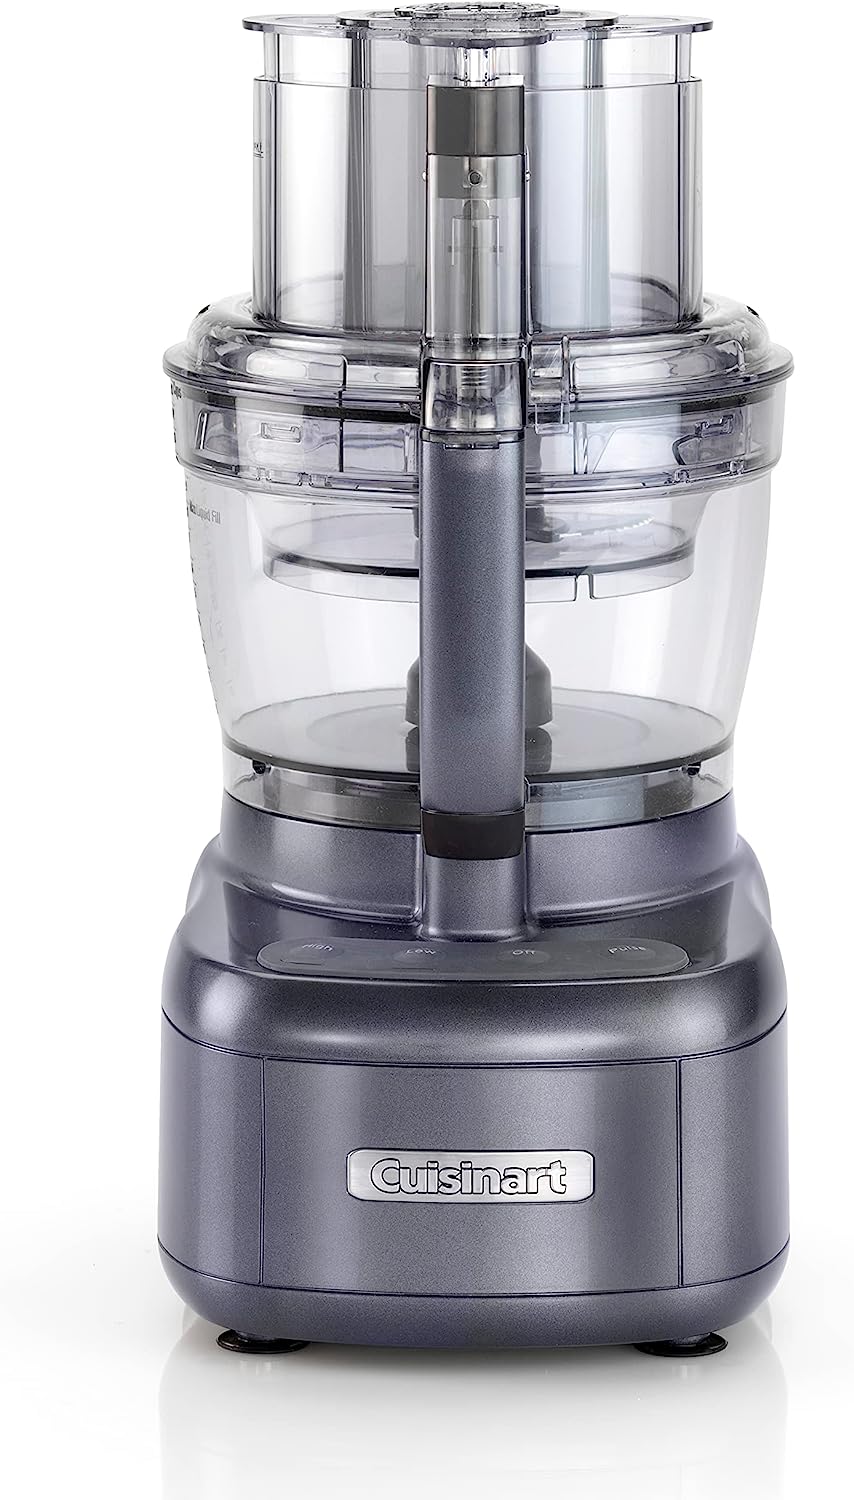 Cuisinart Expert Prep Pro FP1300BE FOOD Processor Mixer With Extensive Accessories Midnight Blue